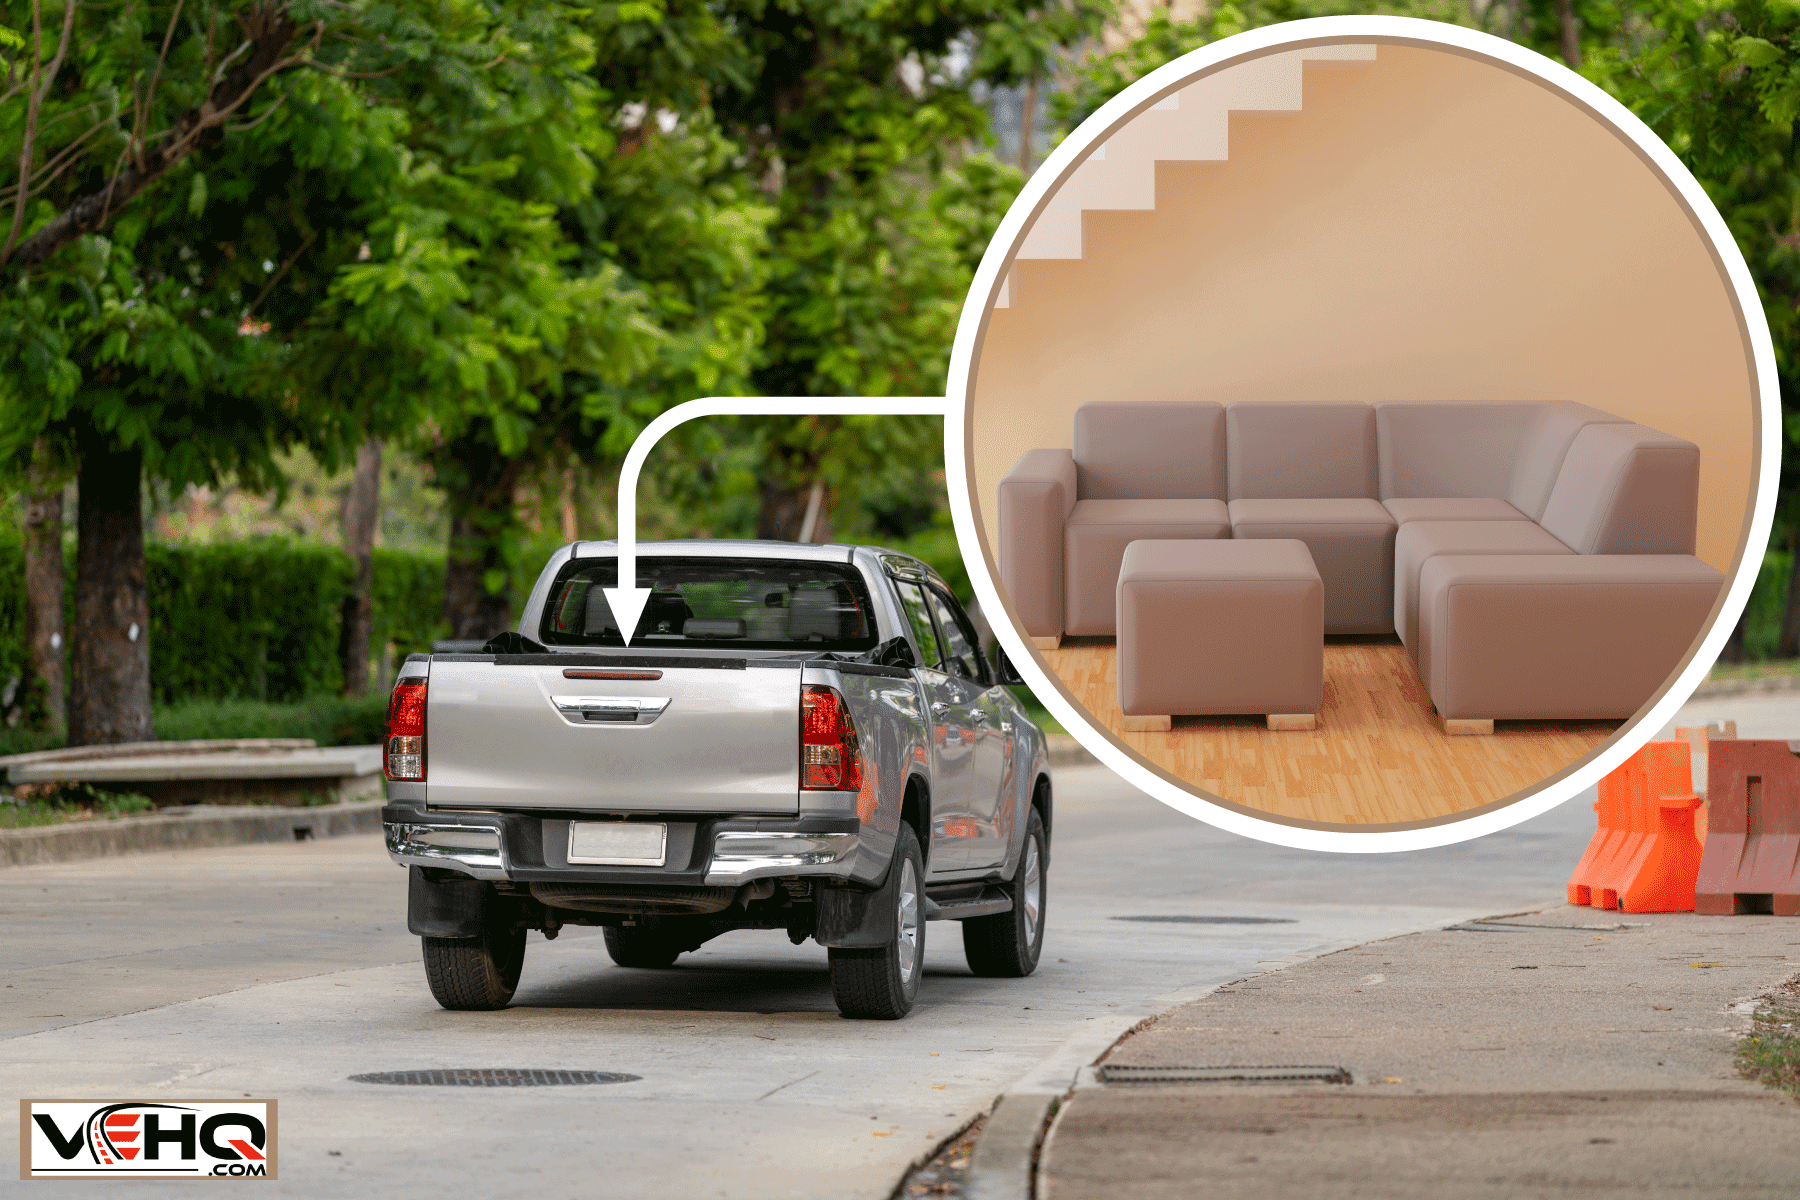 Pickup moving on the road, Can You Fit A Couch In A Pickup Truck Or SUV?